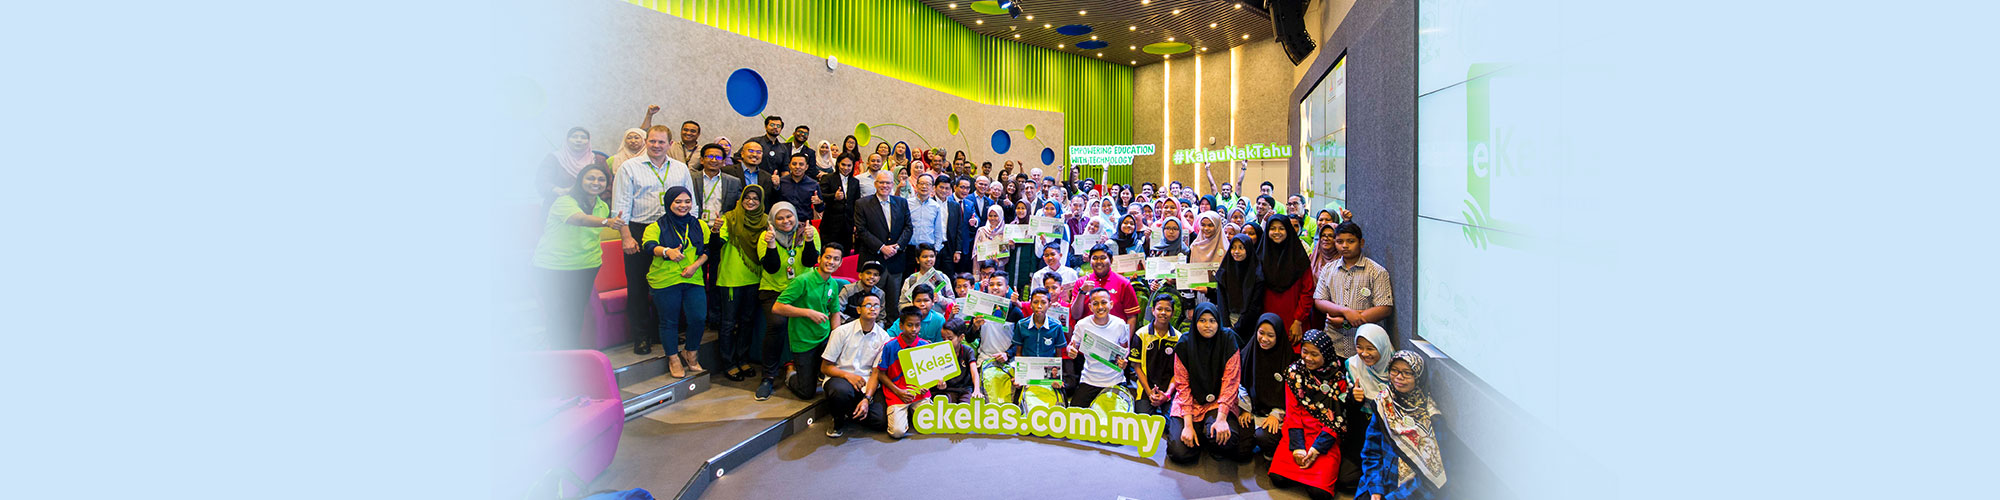 Maxis’ eKelas On A Strong Growth Momentum With Expanding Student Registrations And Reach